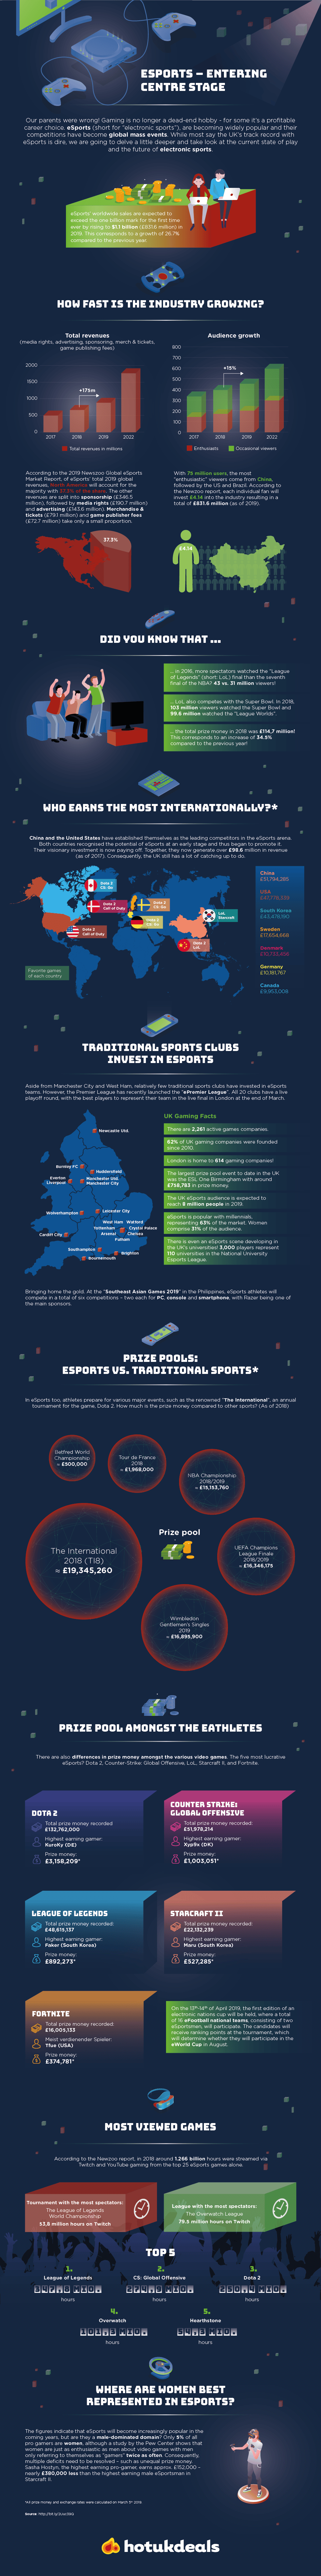 eSports Passion Industry Infographic Image